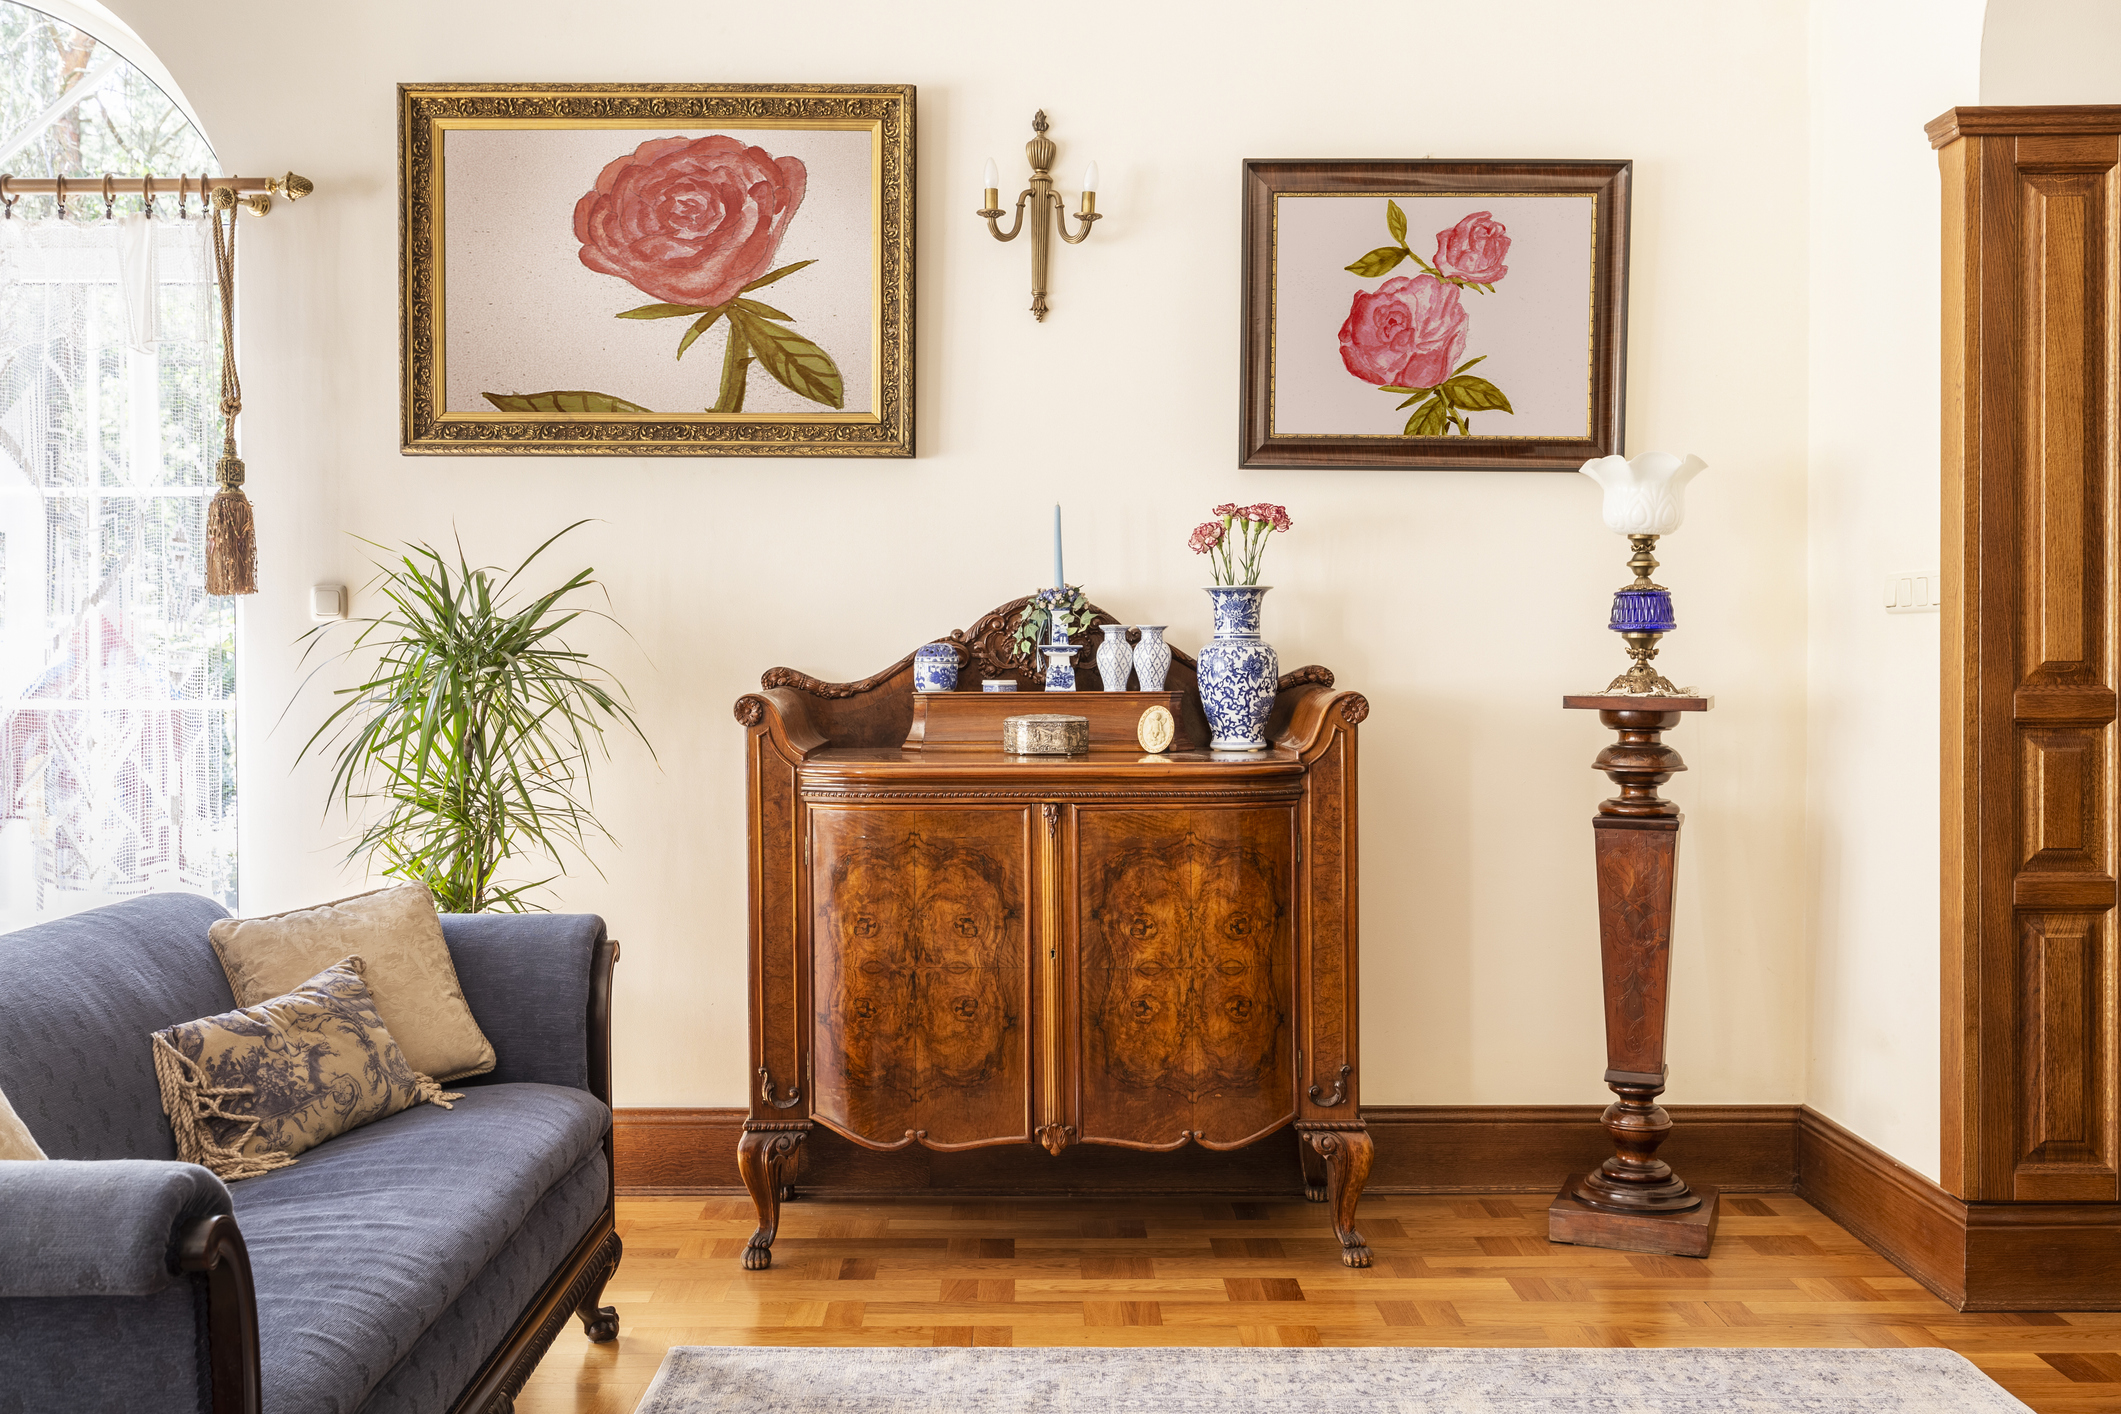 antique cabinet with porcelain decorations, paintings with roses and blue sofa in a living room interior